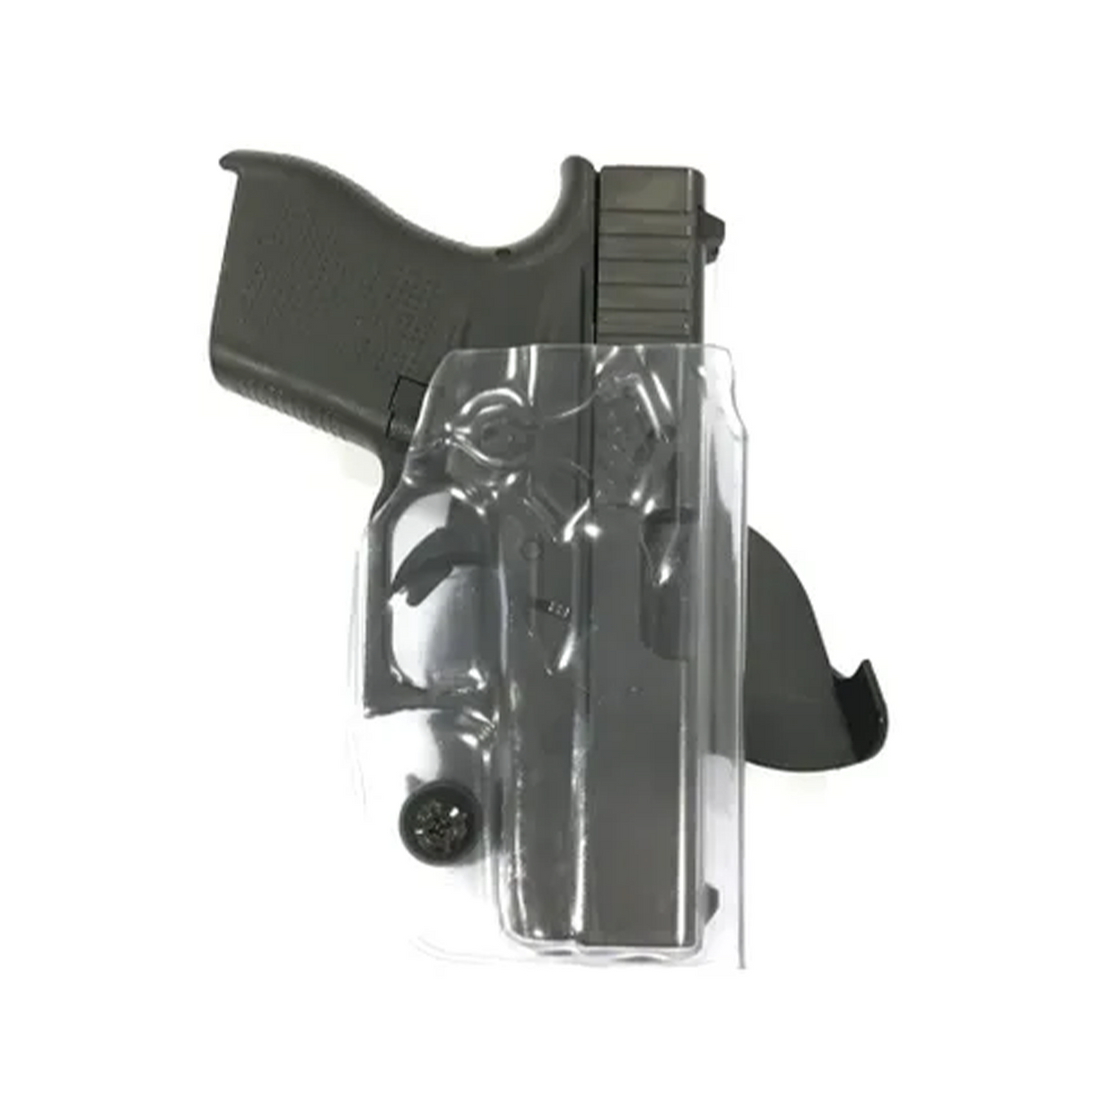 Chiappa OWB Paddle Holsters